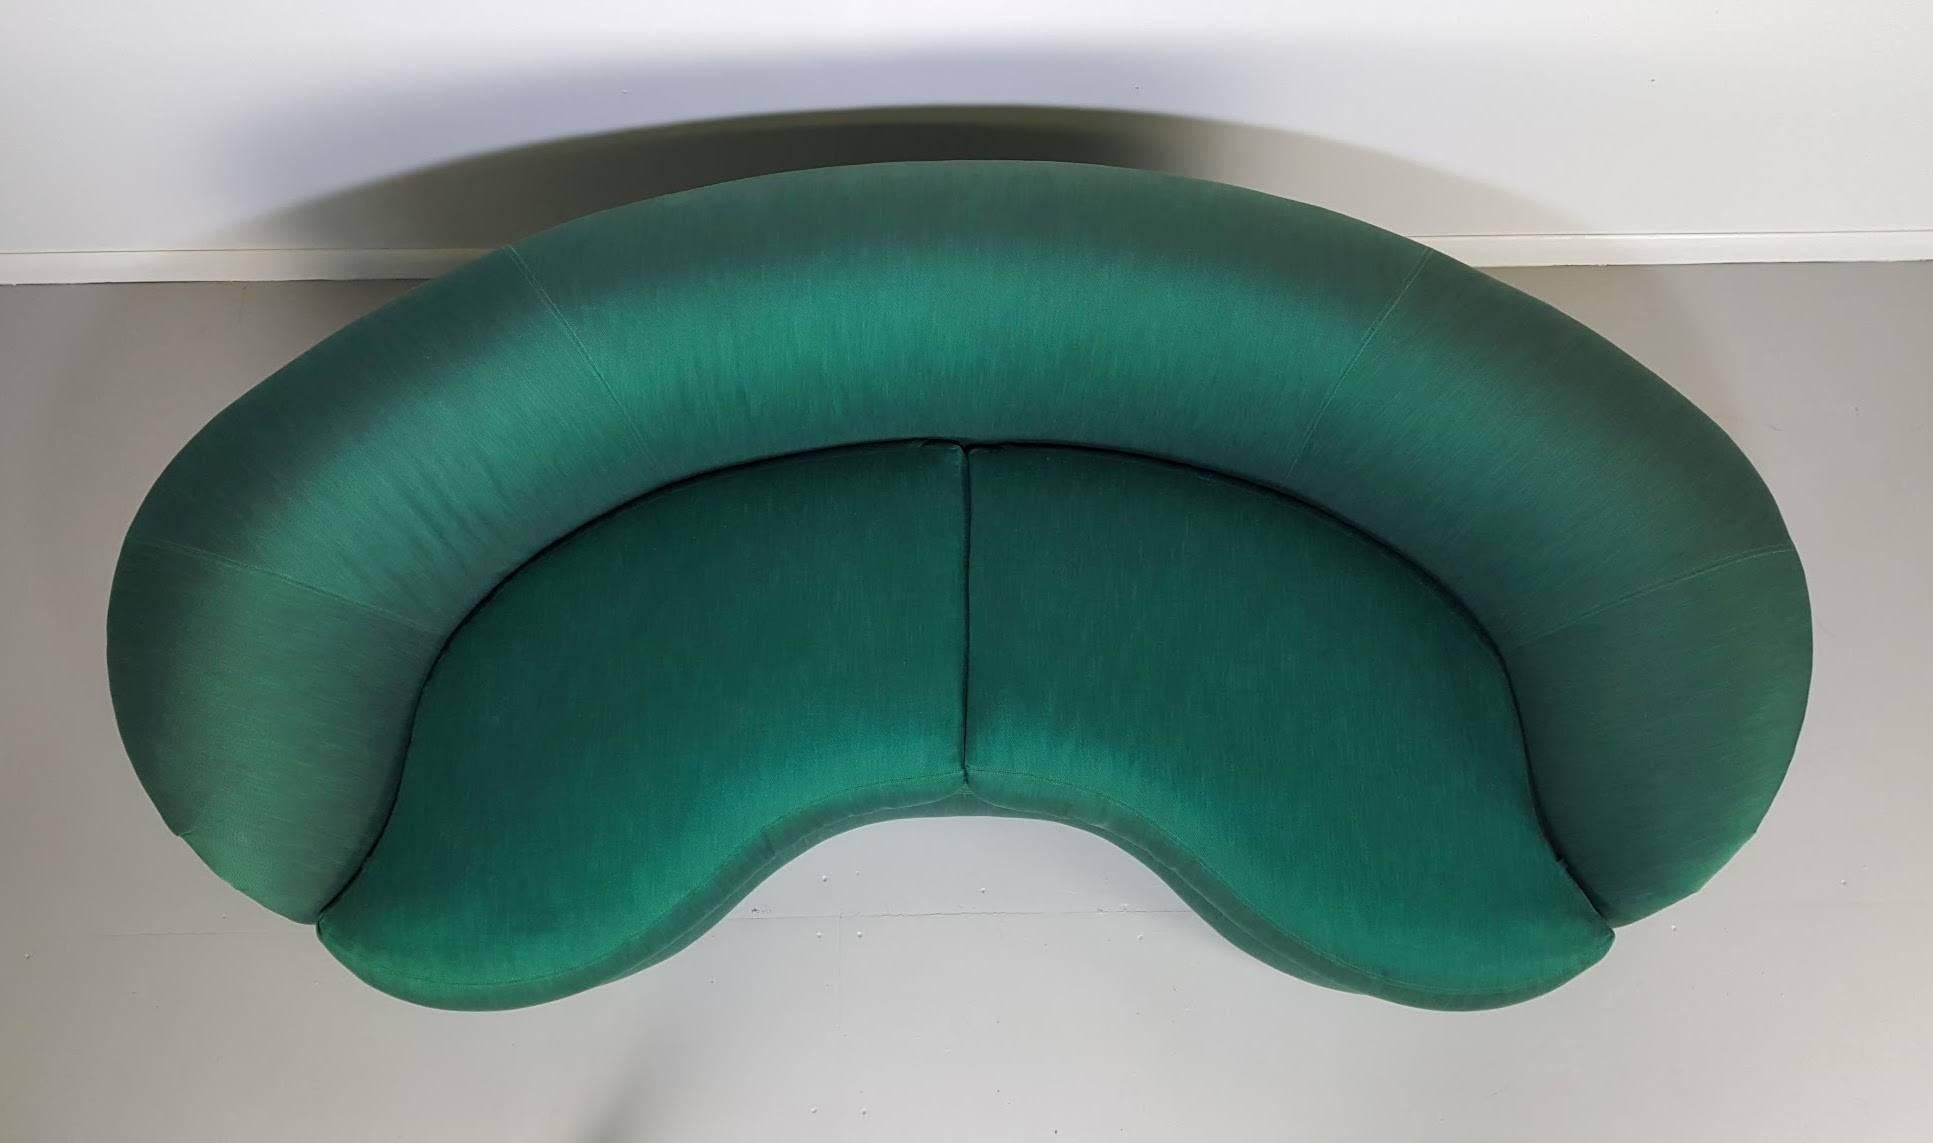 Biomorphic kidney bean shaped sofa by Vladimir Kagan for Directional, 1980s. This piece retains it's original upholstery which is in good condition.

See this item in our private NYC showroom! Refine Limited is located in the heart of Chelsea at